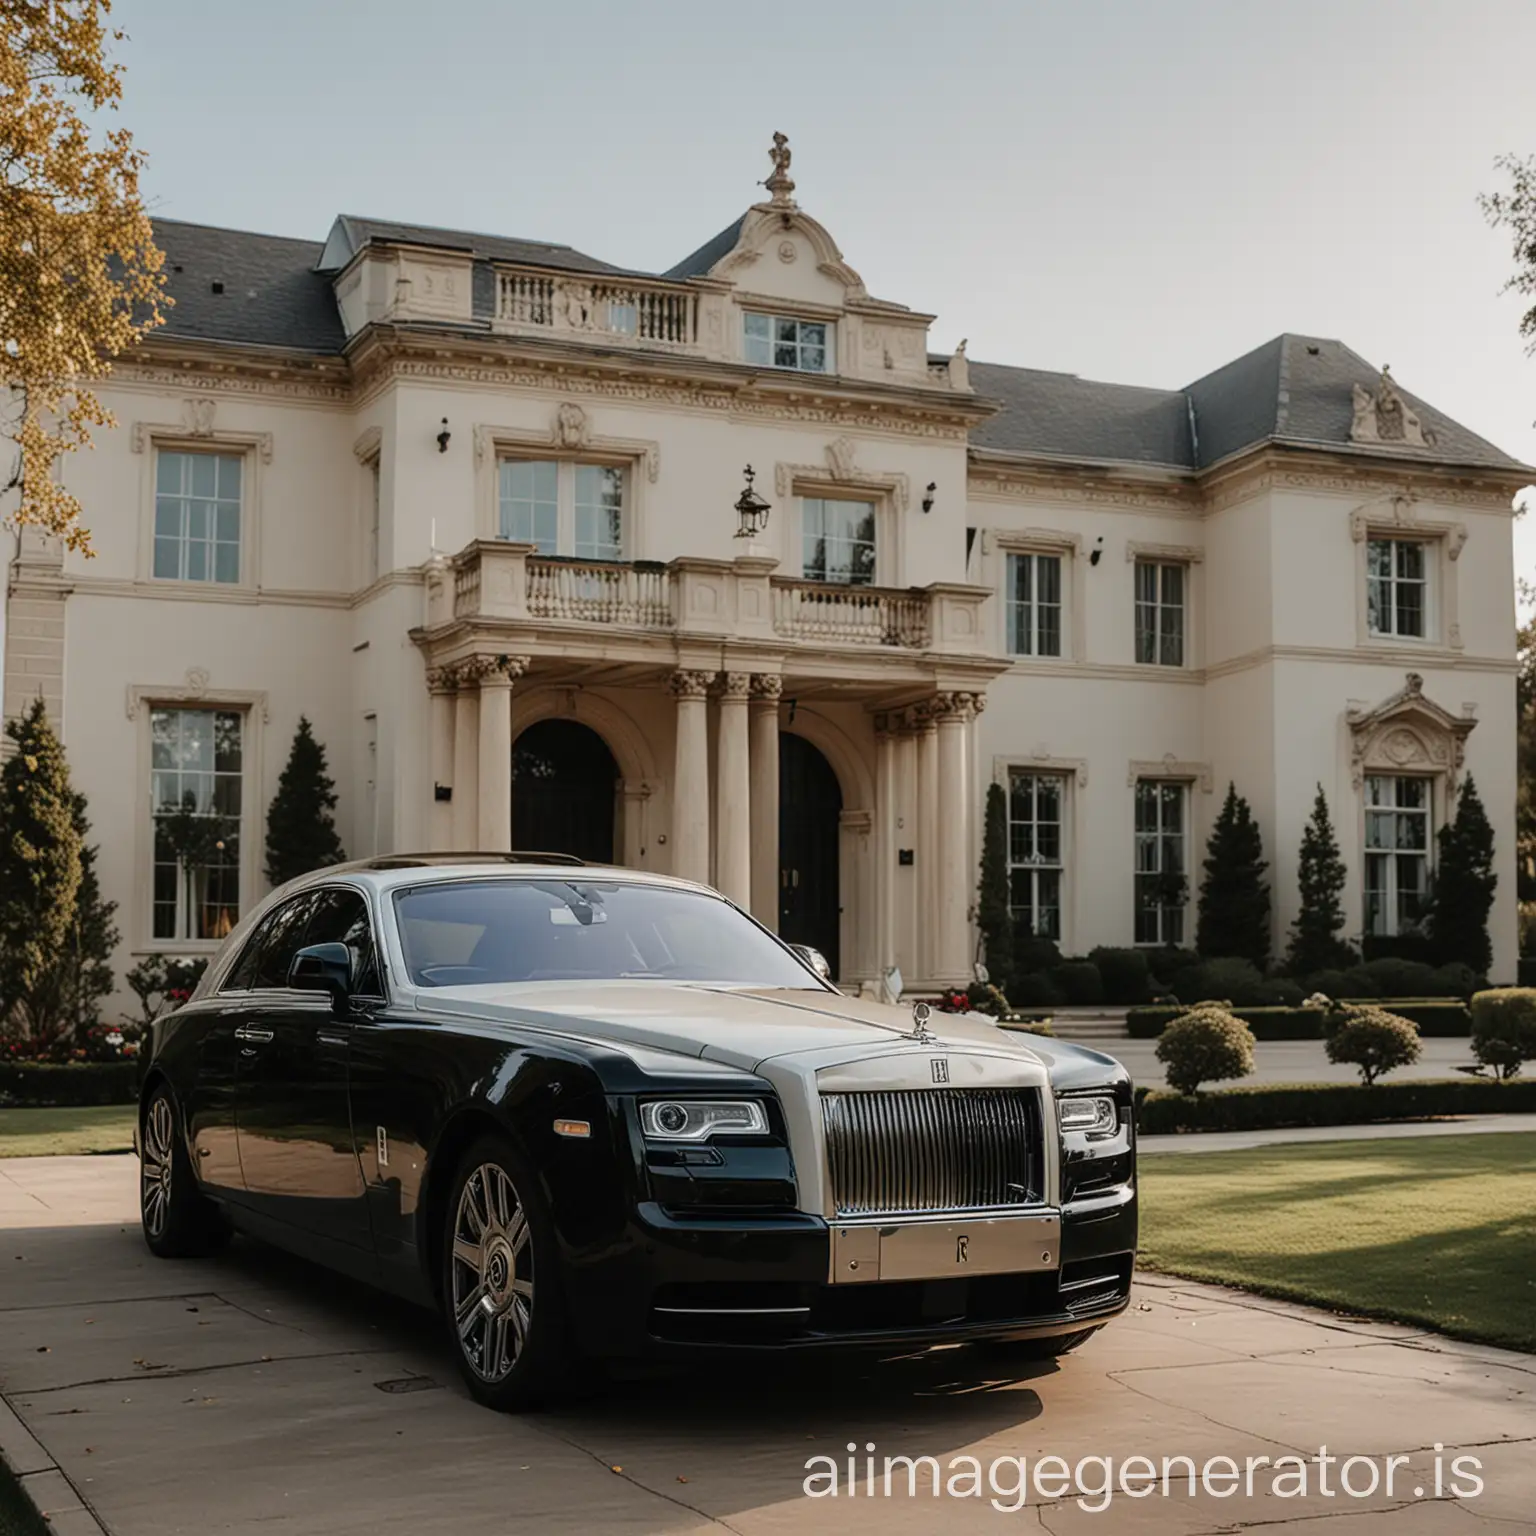 Luxury-Rolls-Royce-Parked-in-Front-of-Mansion